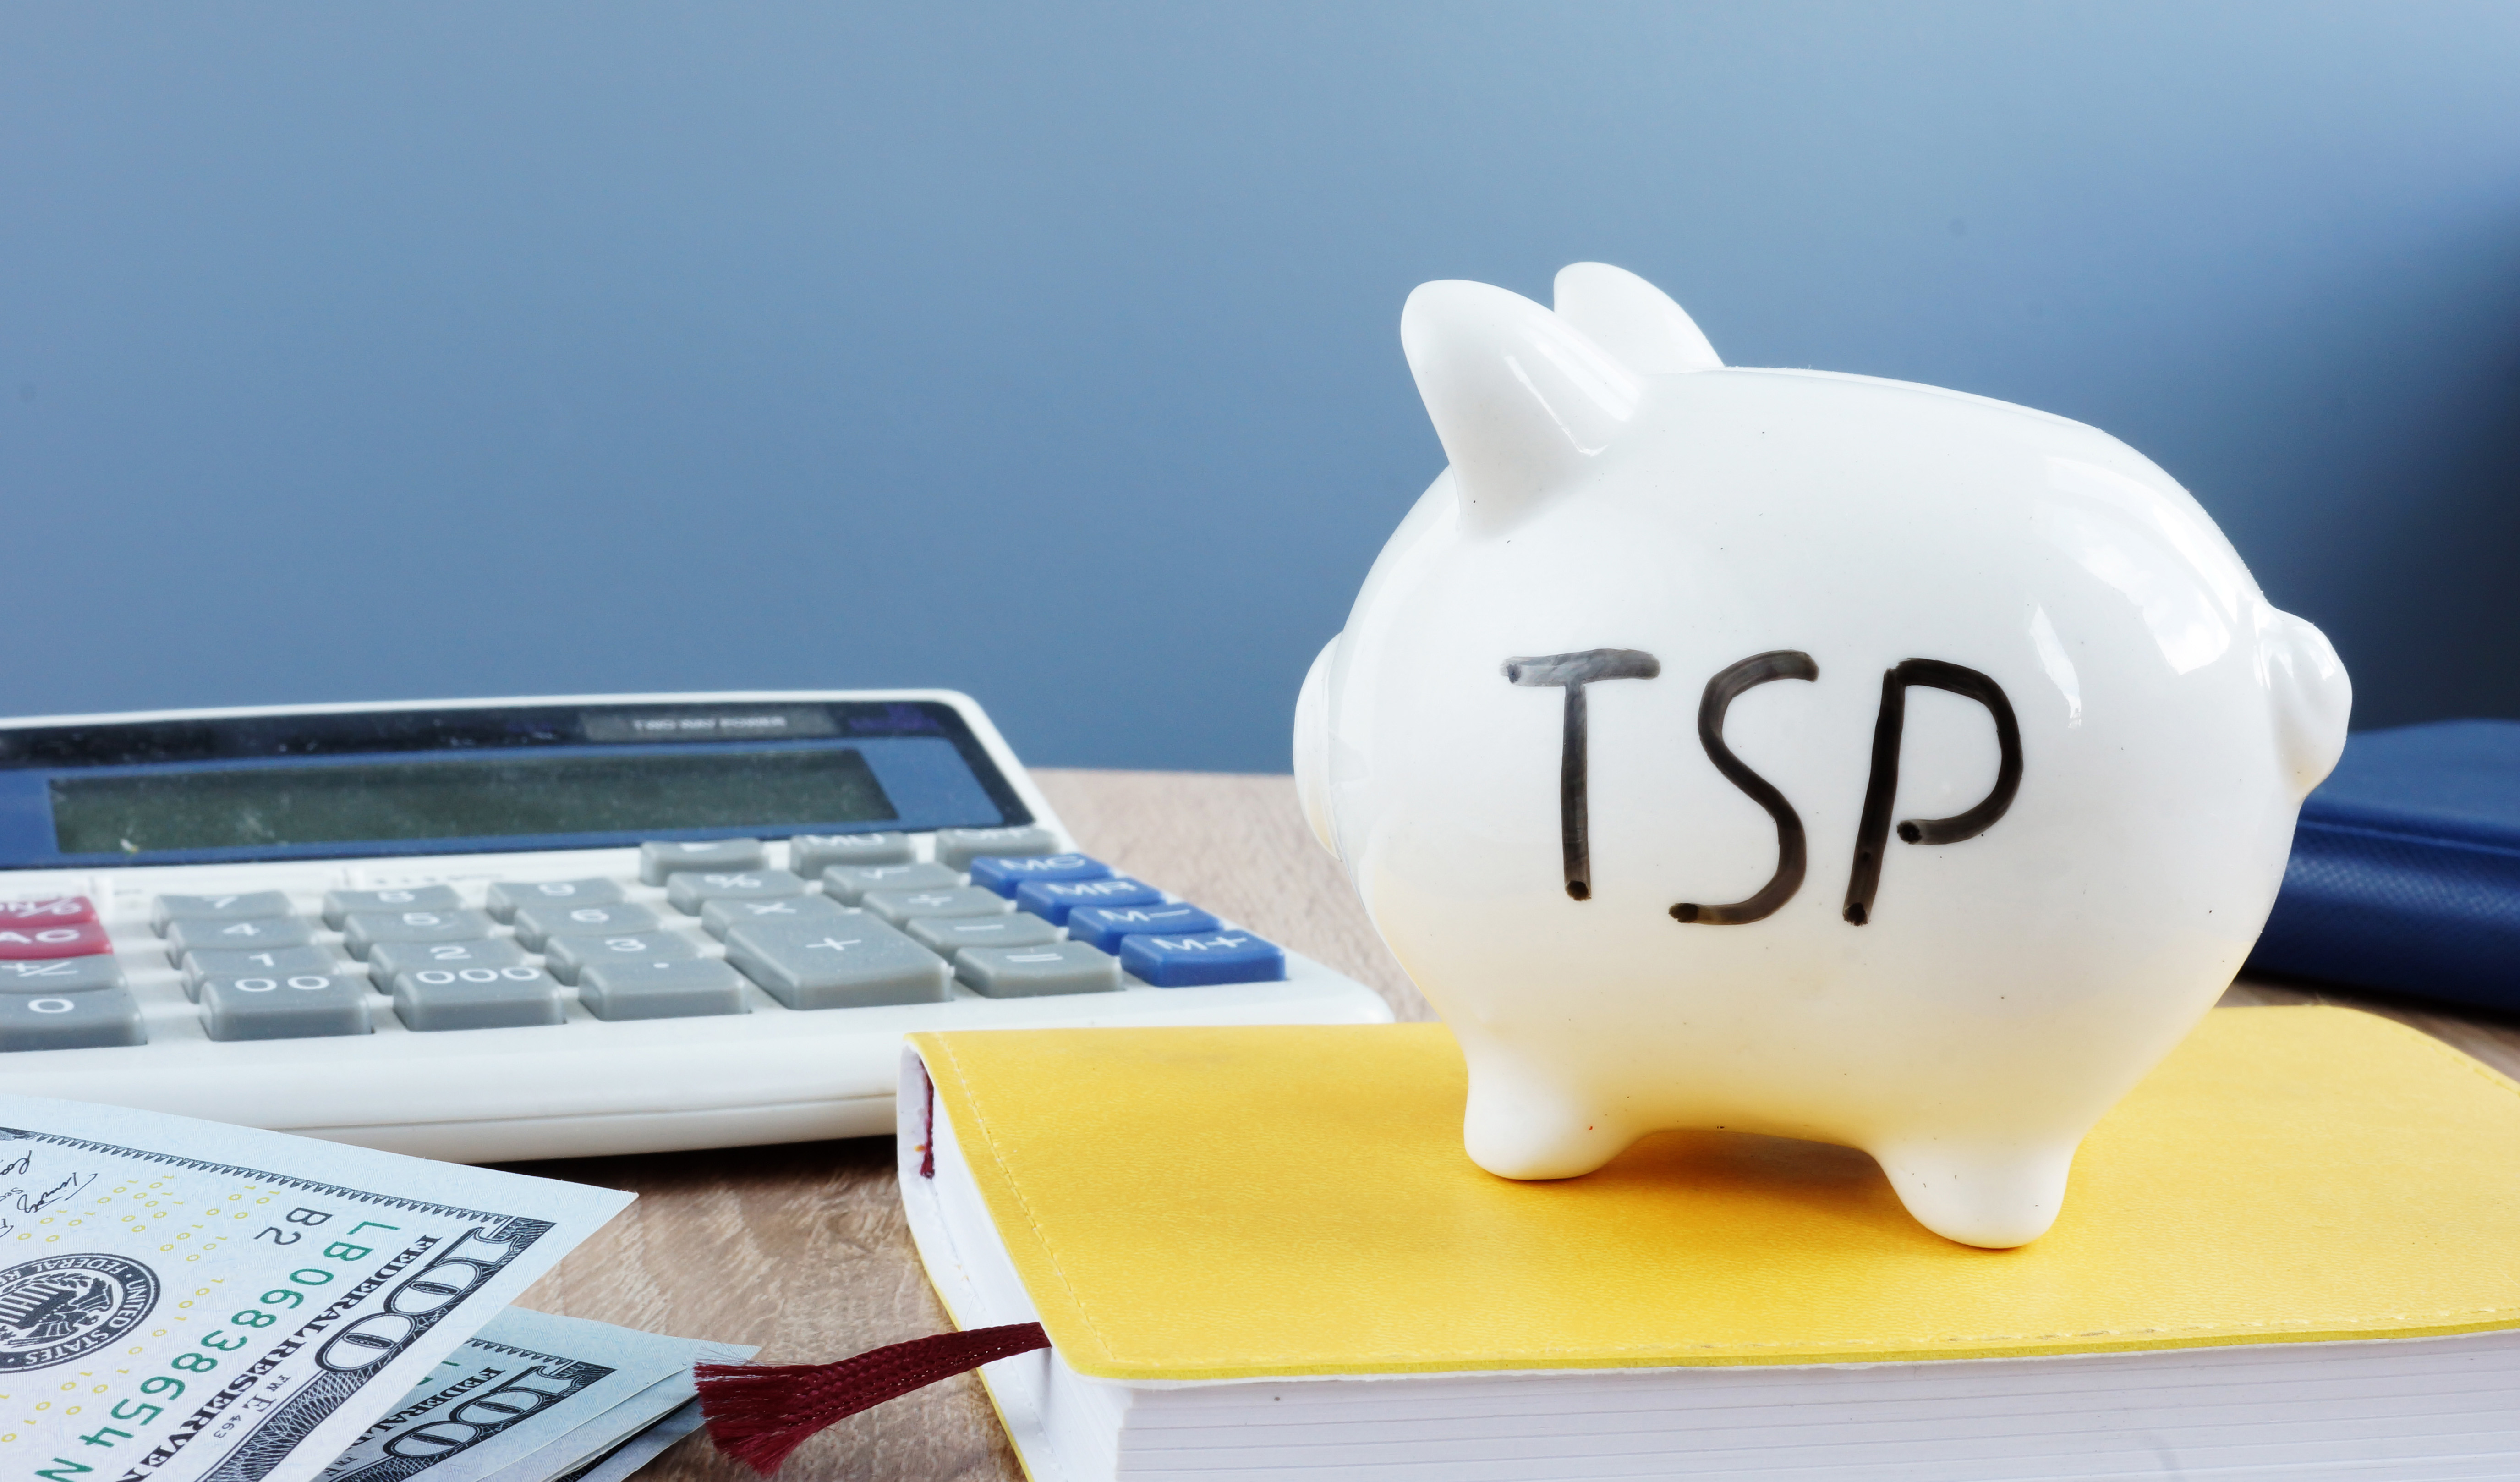 White piggy bank with "TSP" written on its side resting next to a calculator.